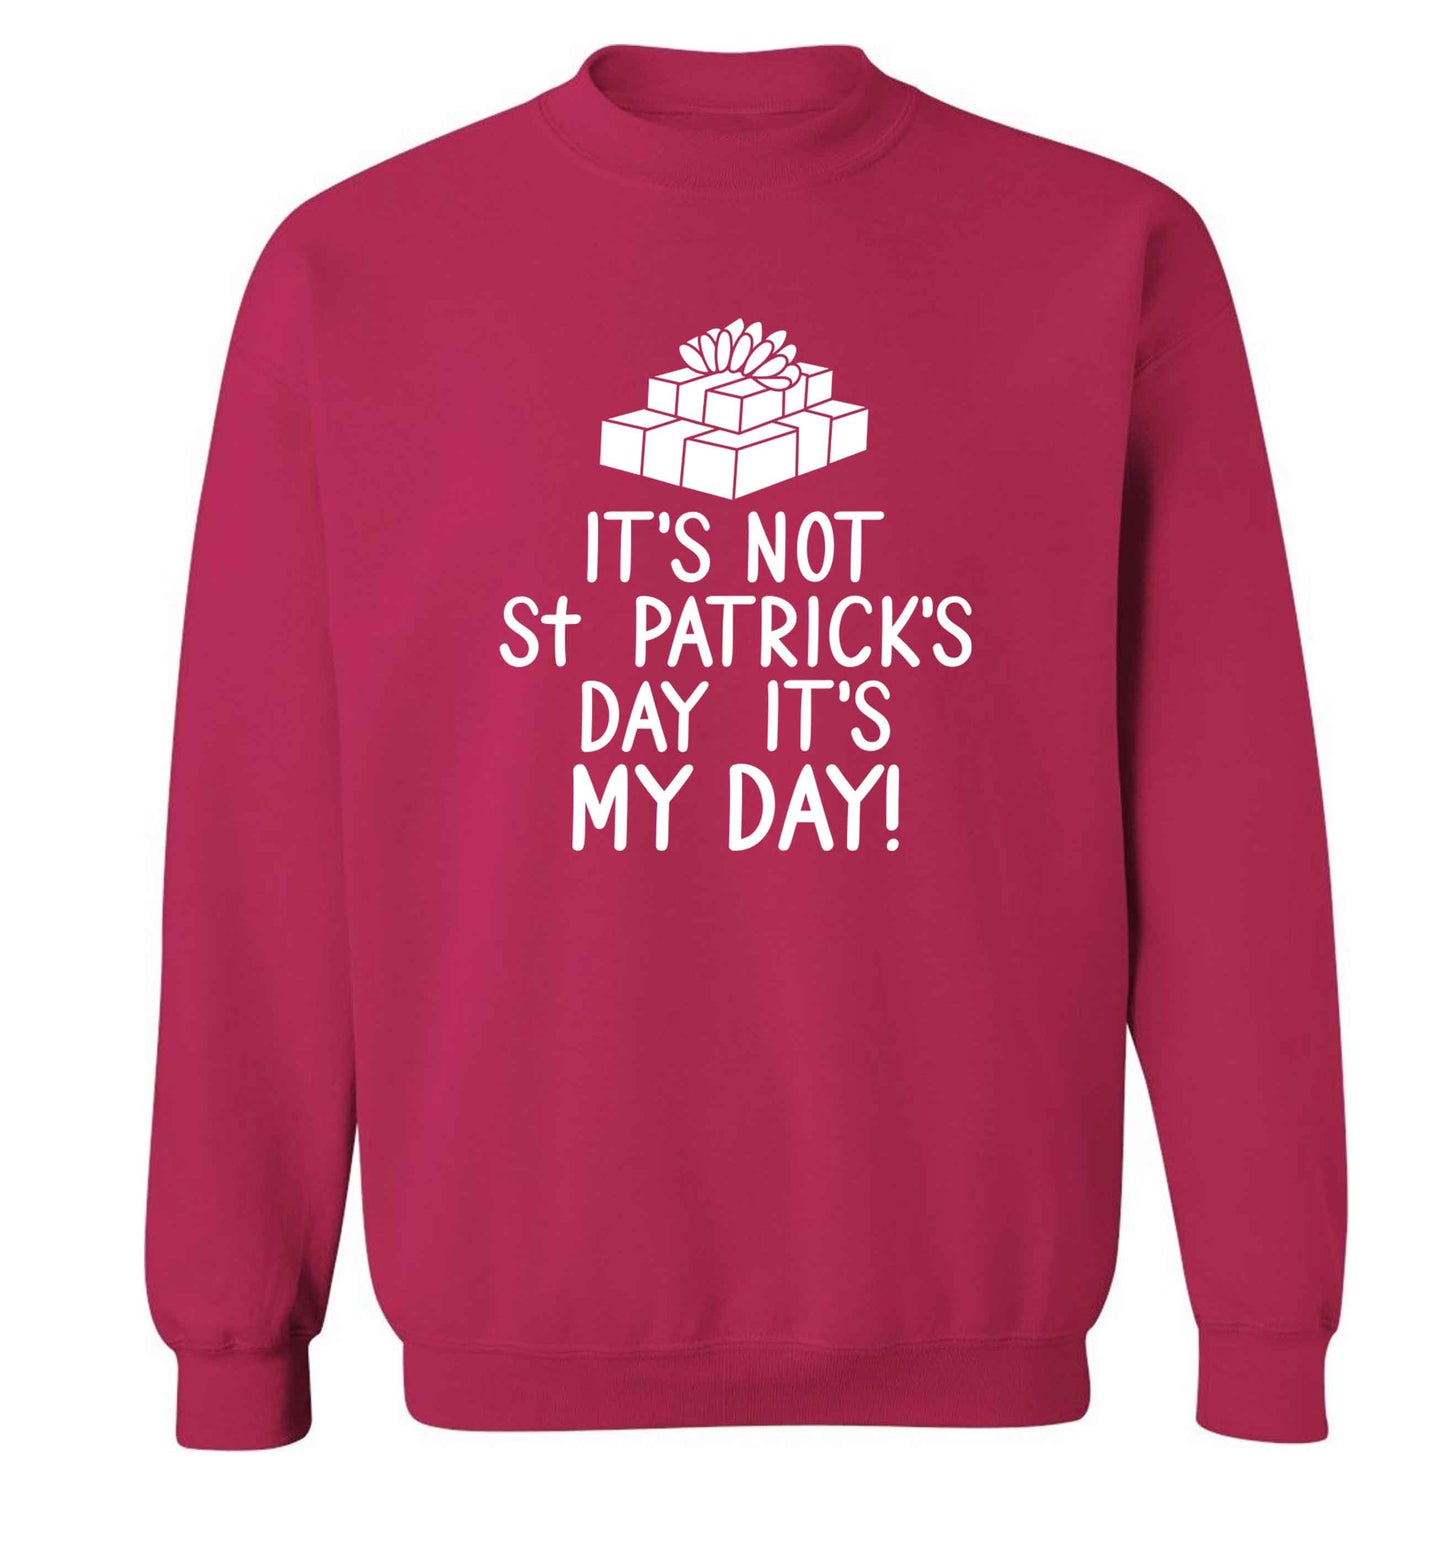 Funny gifts for your mum on mother's dayor her birthday! It's not St Patricks day it's my day adult's unisex pink sweater 2XL